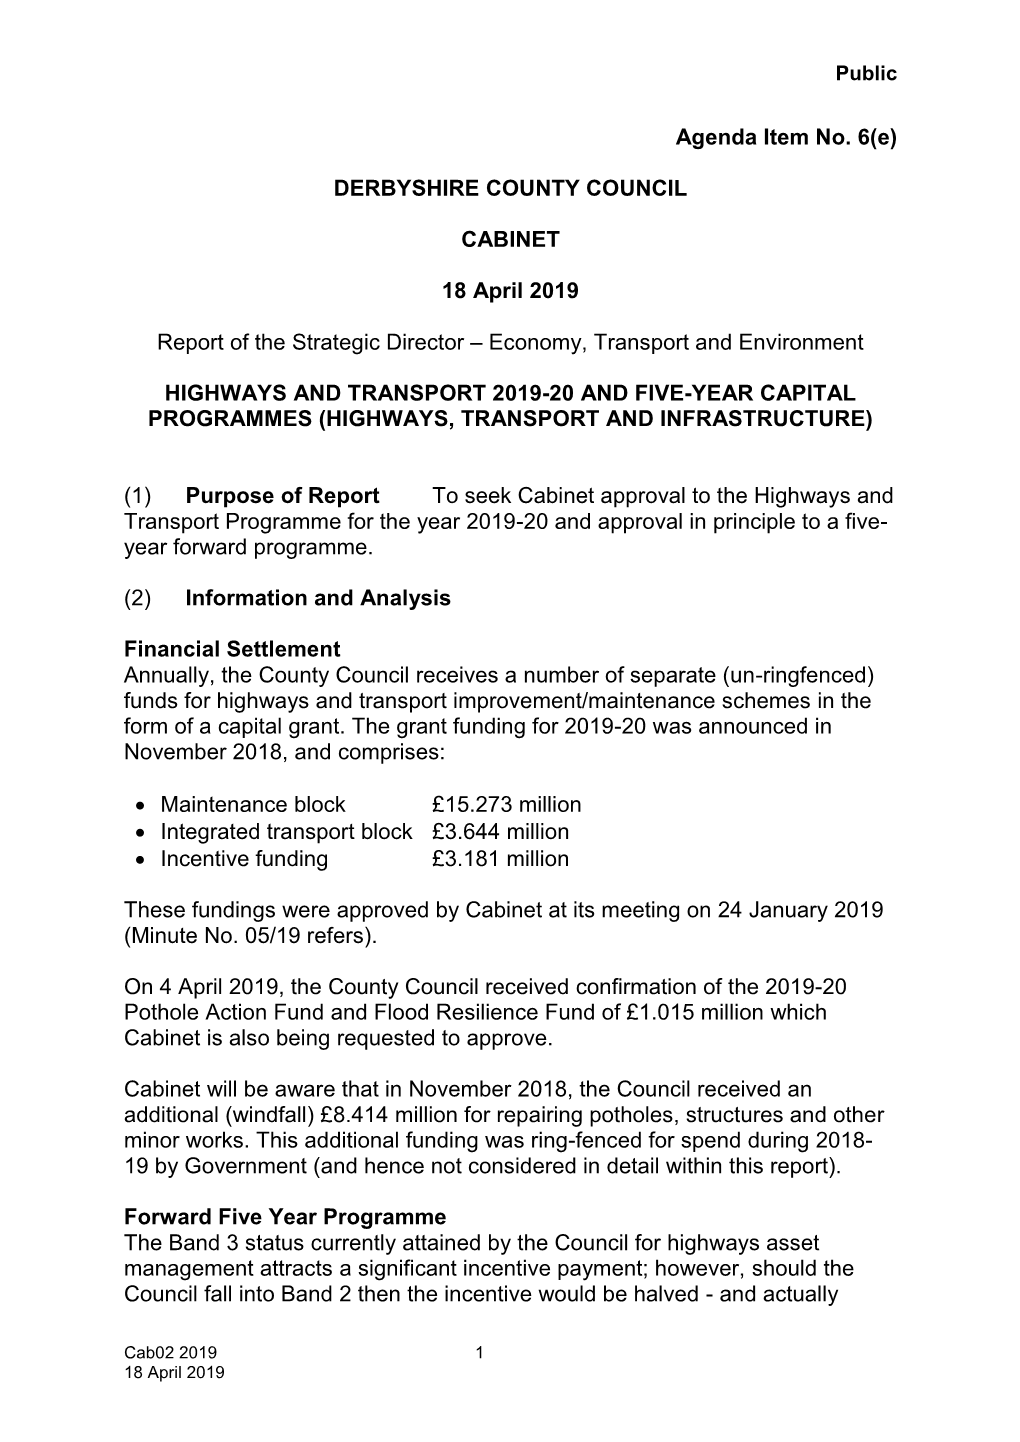 Highways and Transport 2019 to 2020 and 5 Year Capital Programmes